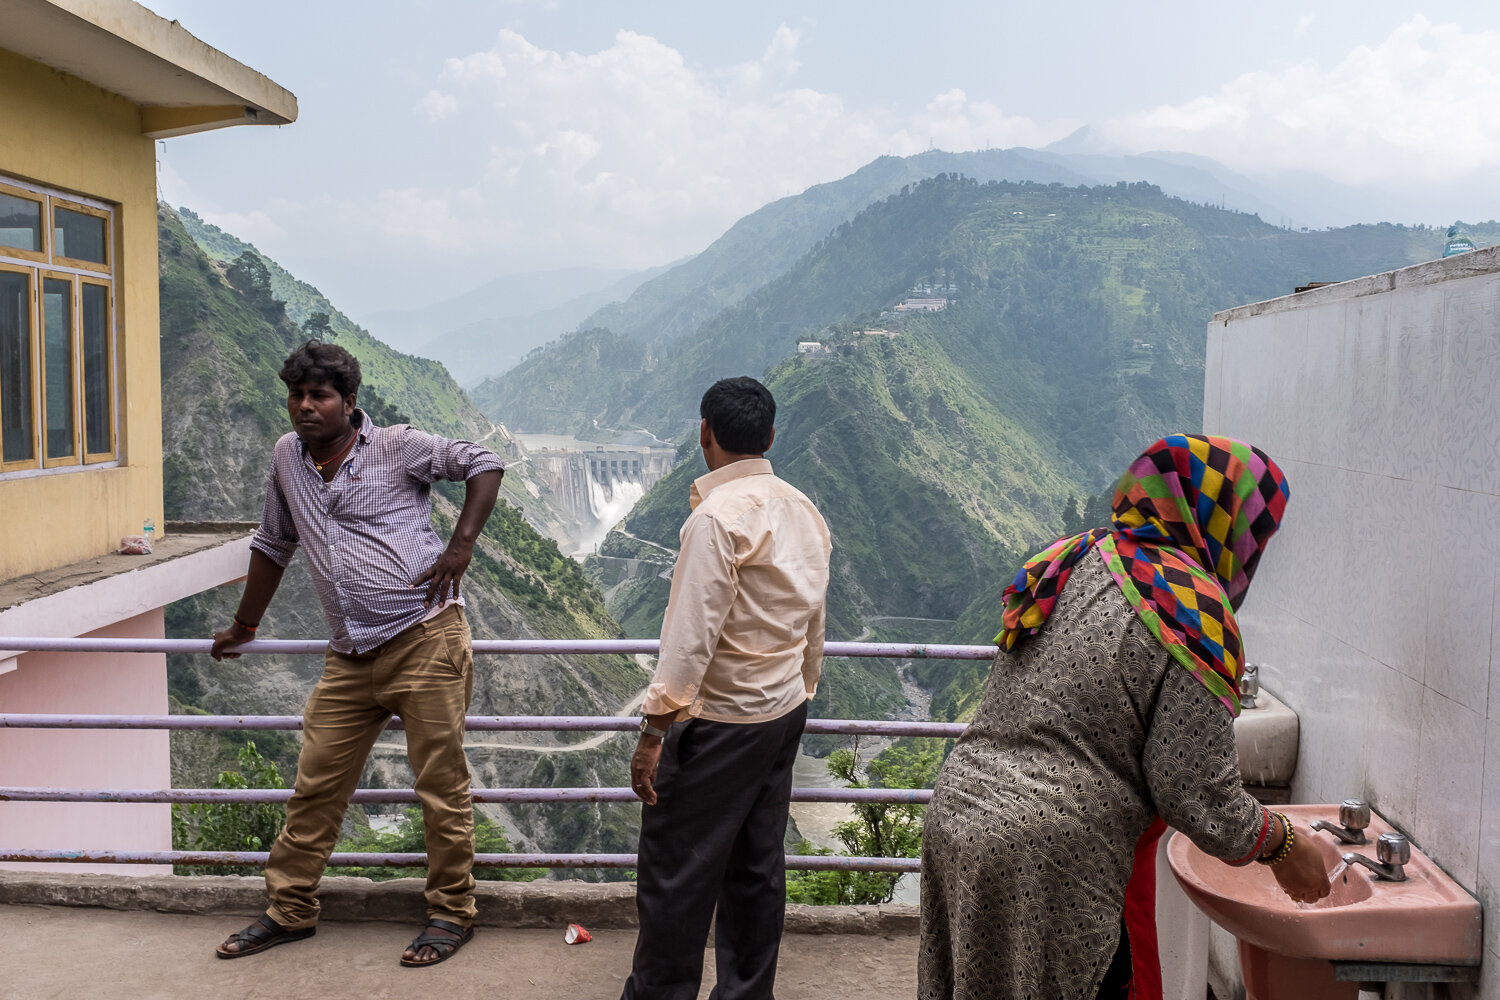  The Baglihar Dam, a hydroelectric power project on the Chenab River, stands in the valley behind patrons of a roadside cafe on Wednesday, August 9, 2017 in Baglihar, Jammu & Kashmir, India. The Chenab River is one of the major tributaries of the Ind